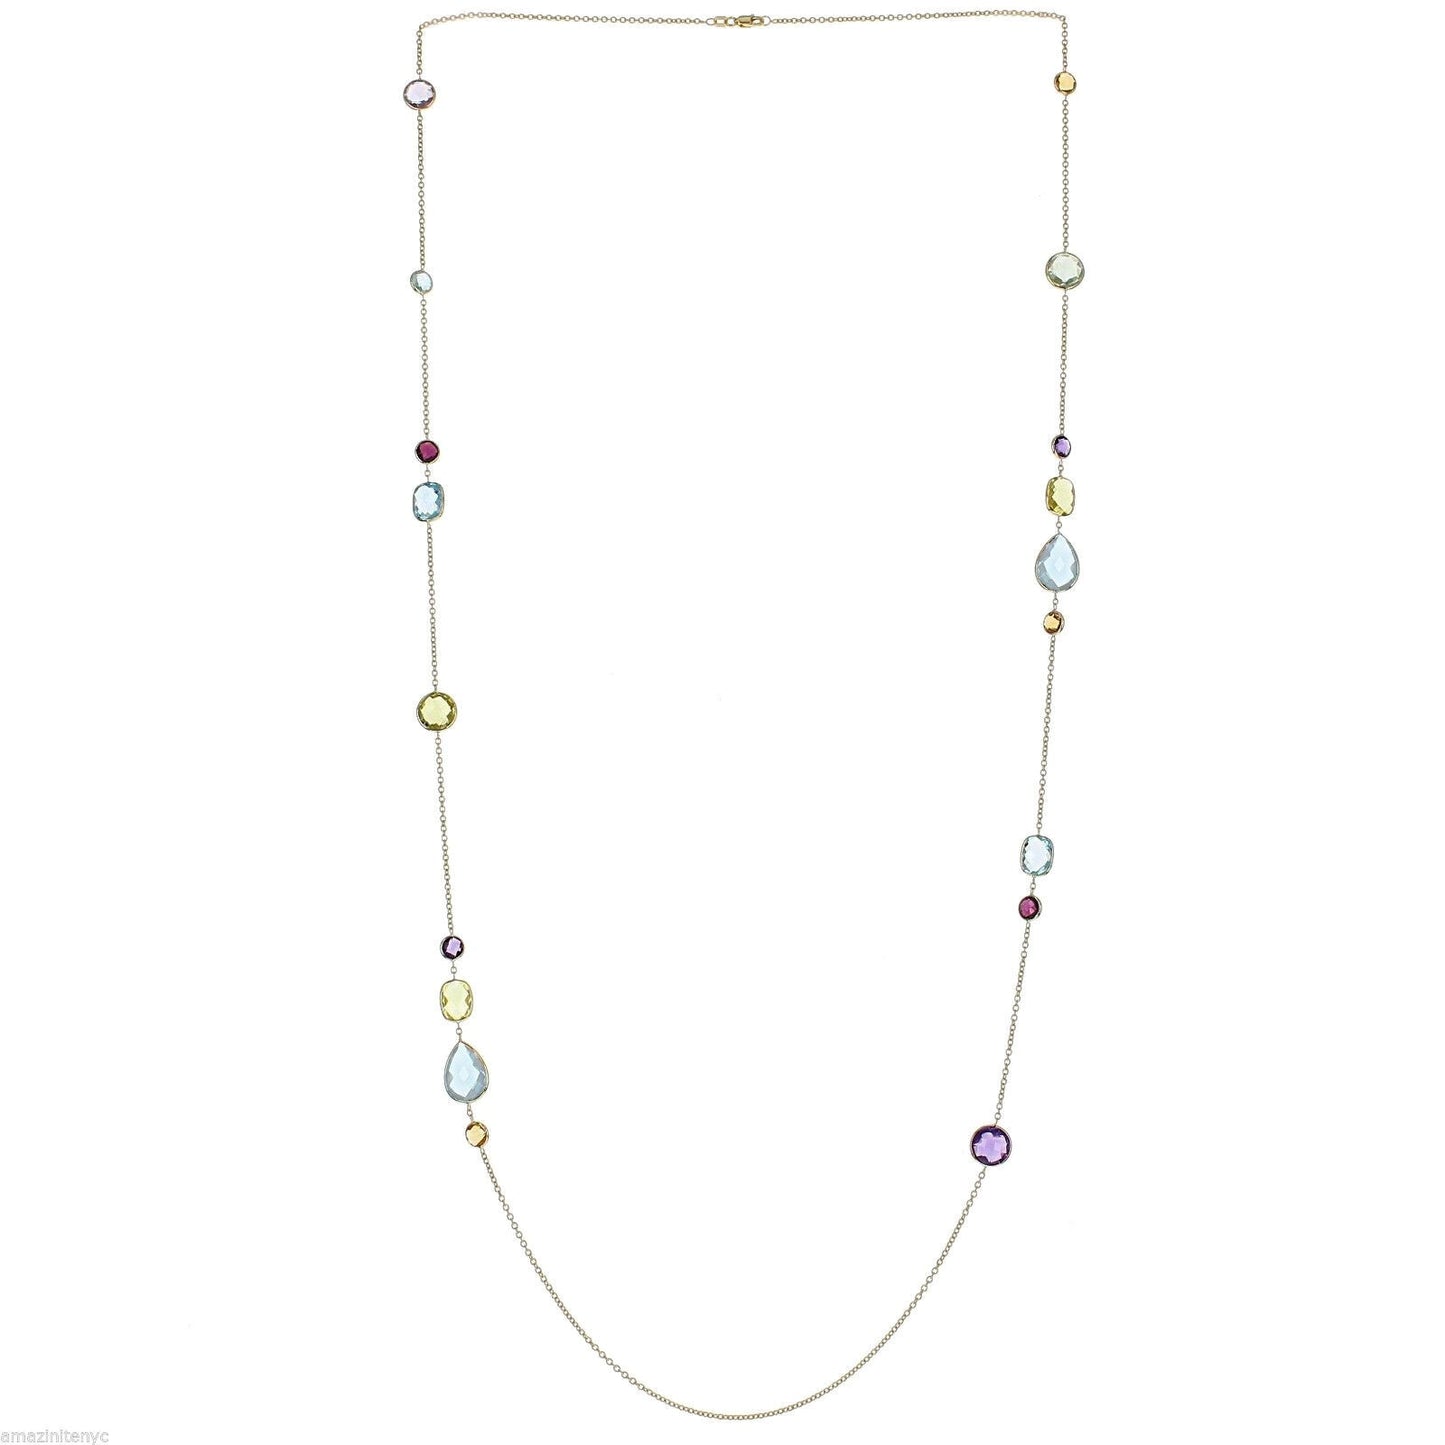 Designer 14K Yellow Gold Necklace With Various Gemstones By The Yard 36 Inches